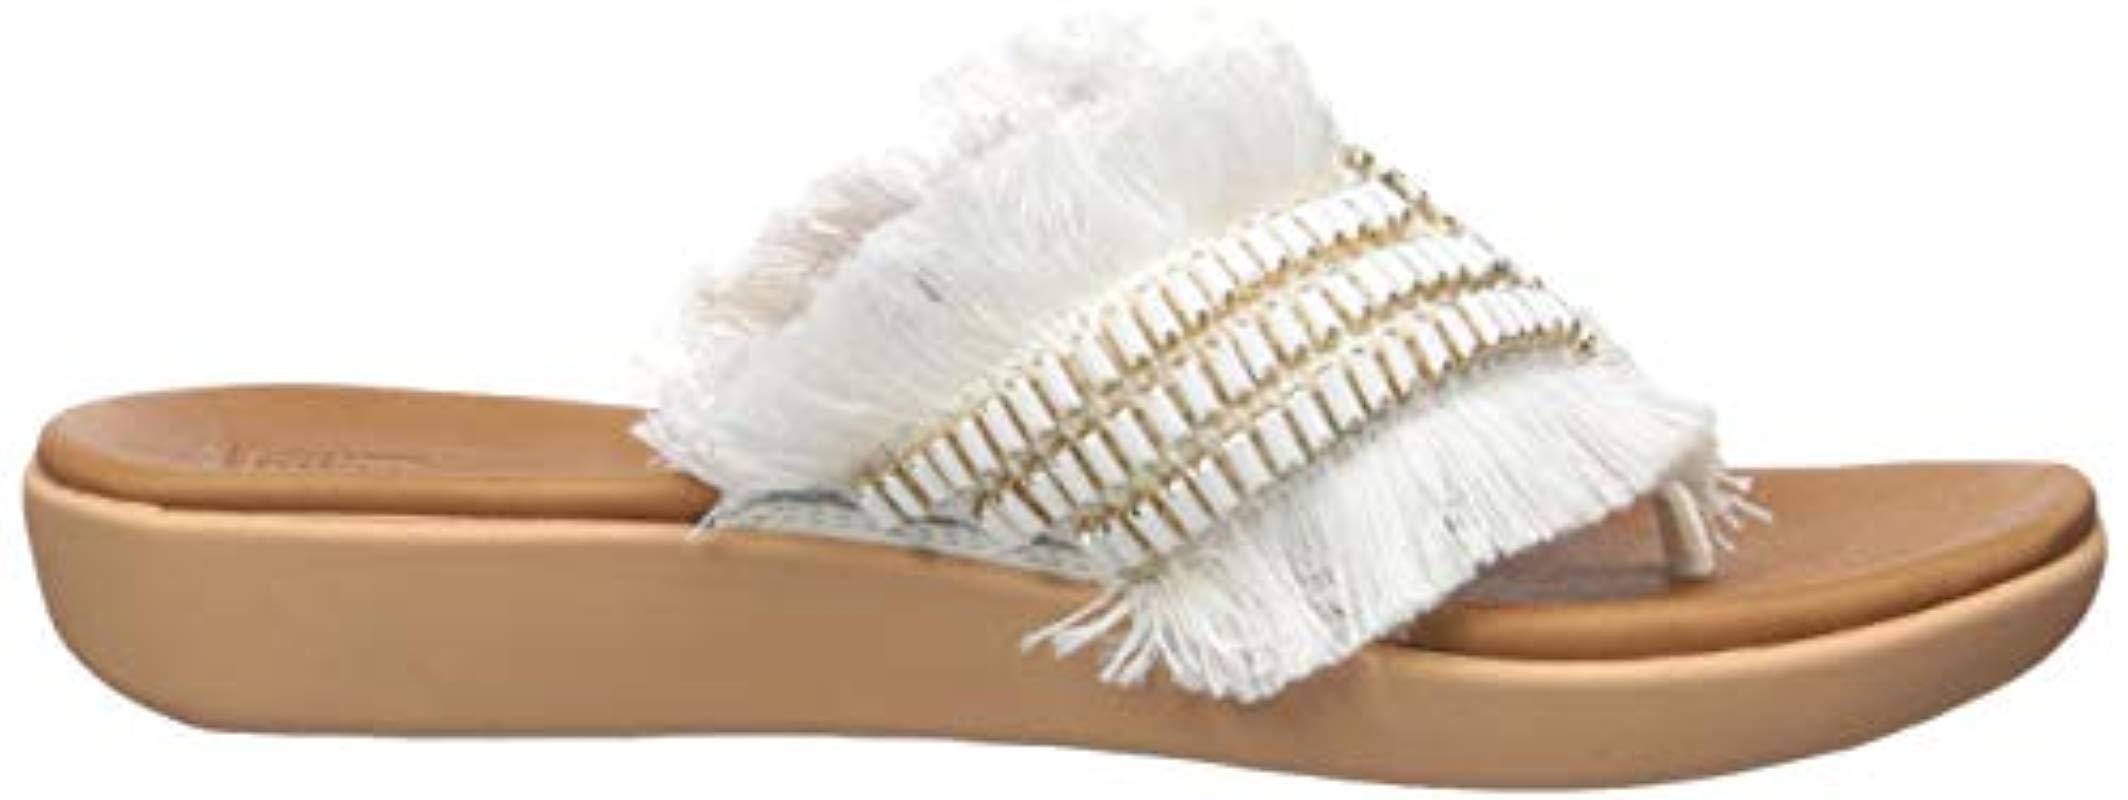 fitflop ava crystal stone sandal